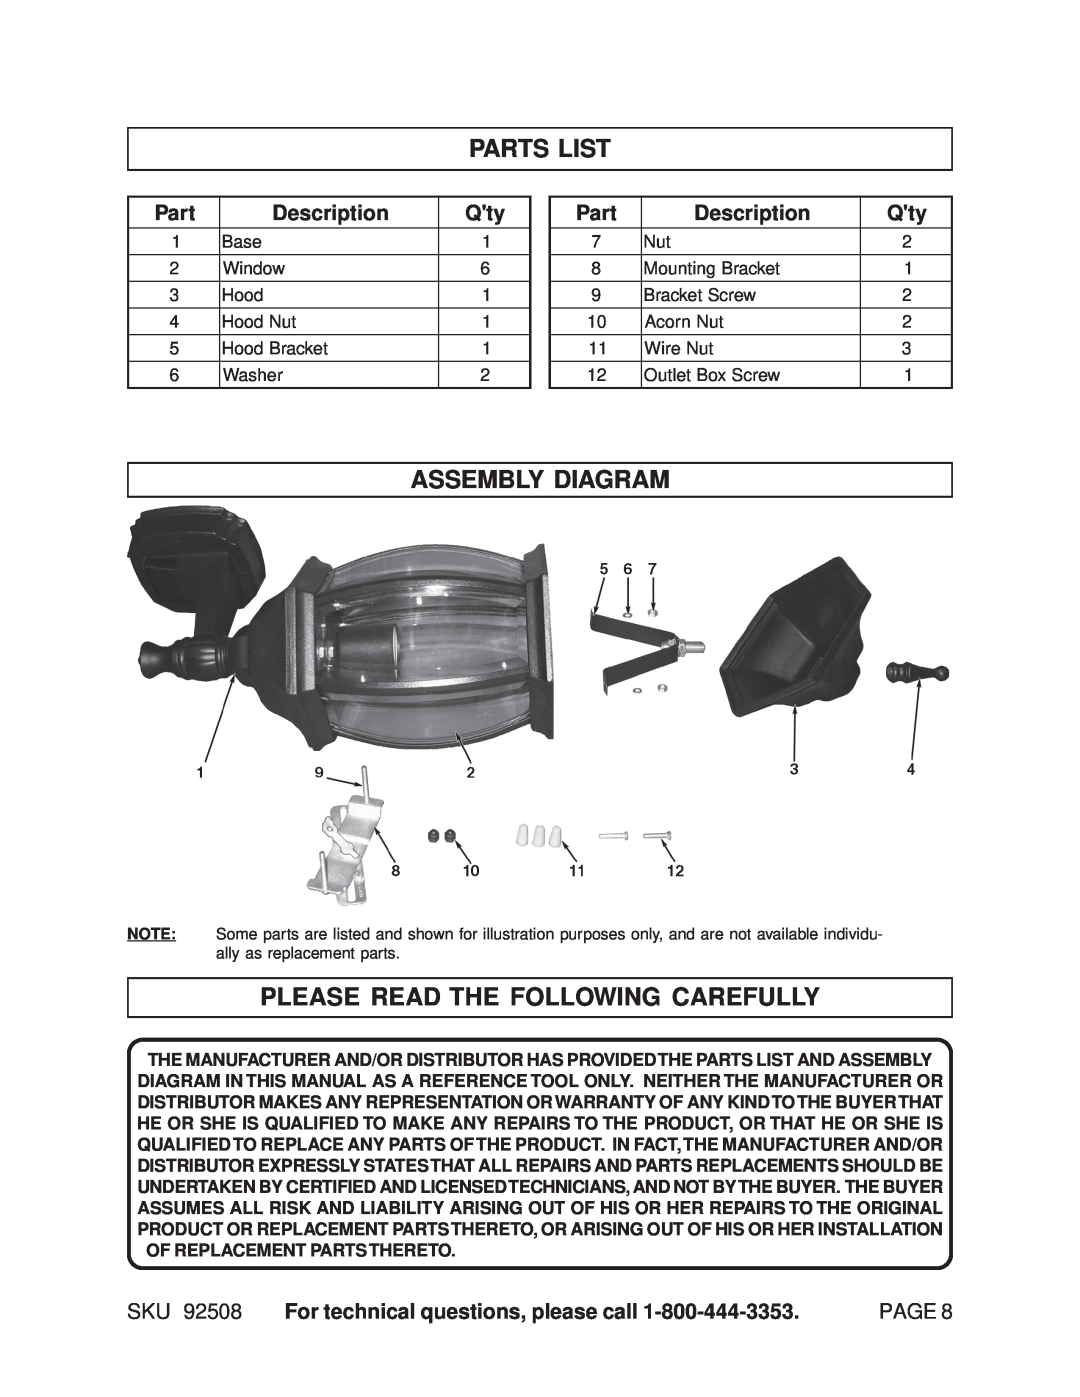 Harbor Freight Tools 92508 manual Parts List, Assembly Diagram, Please Read The Following Carefully, Page 